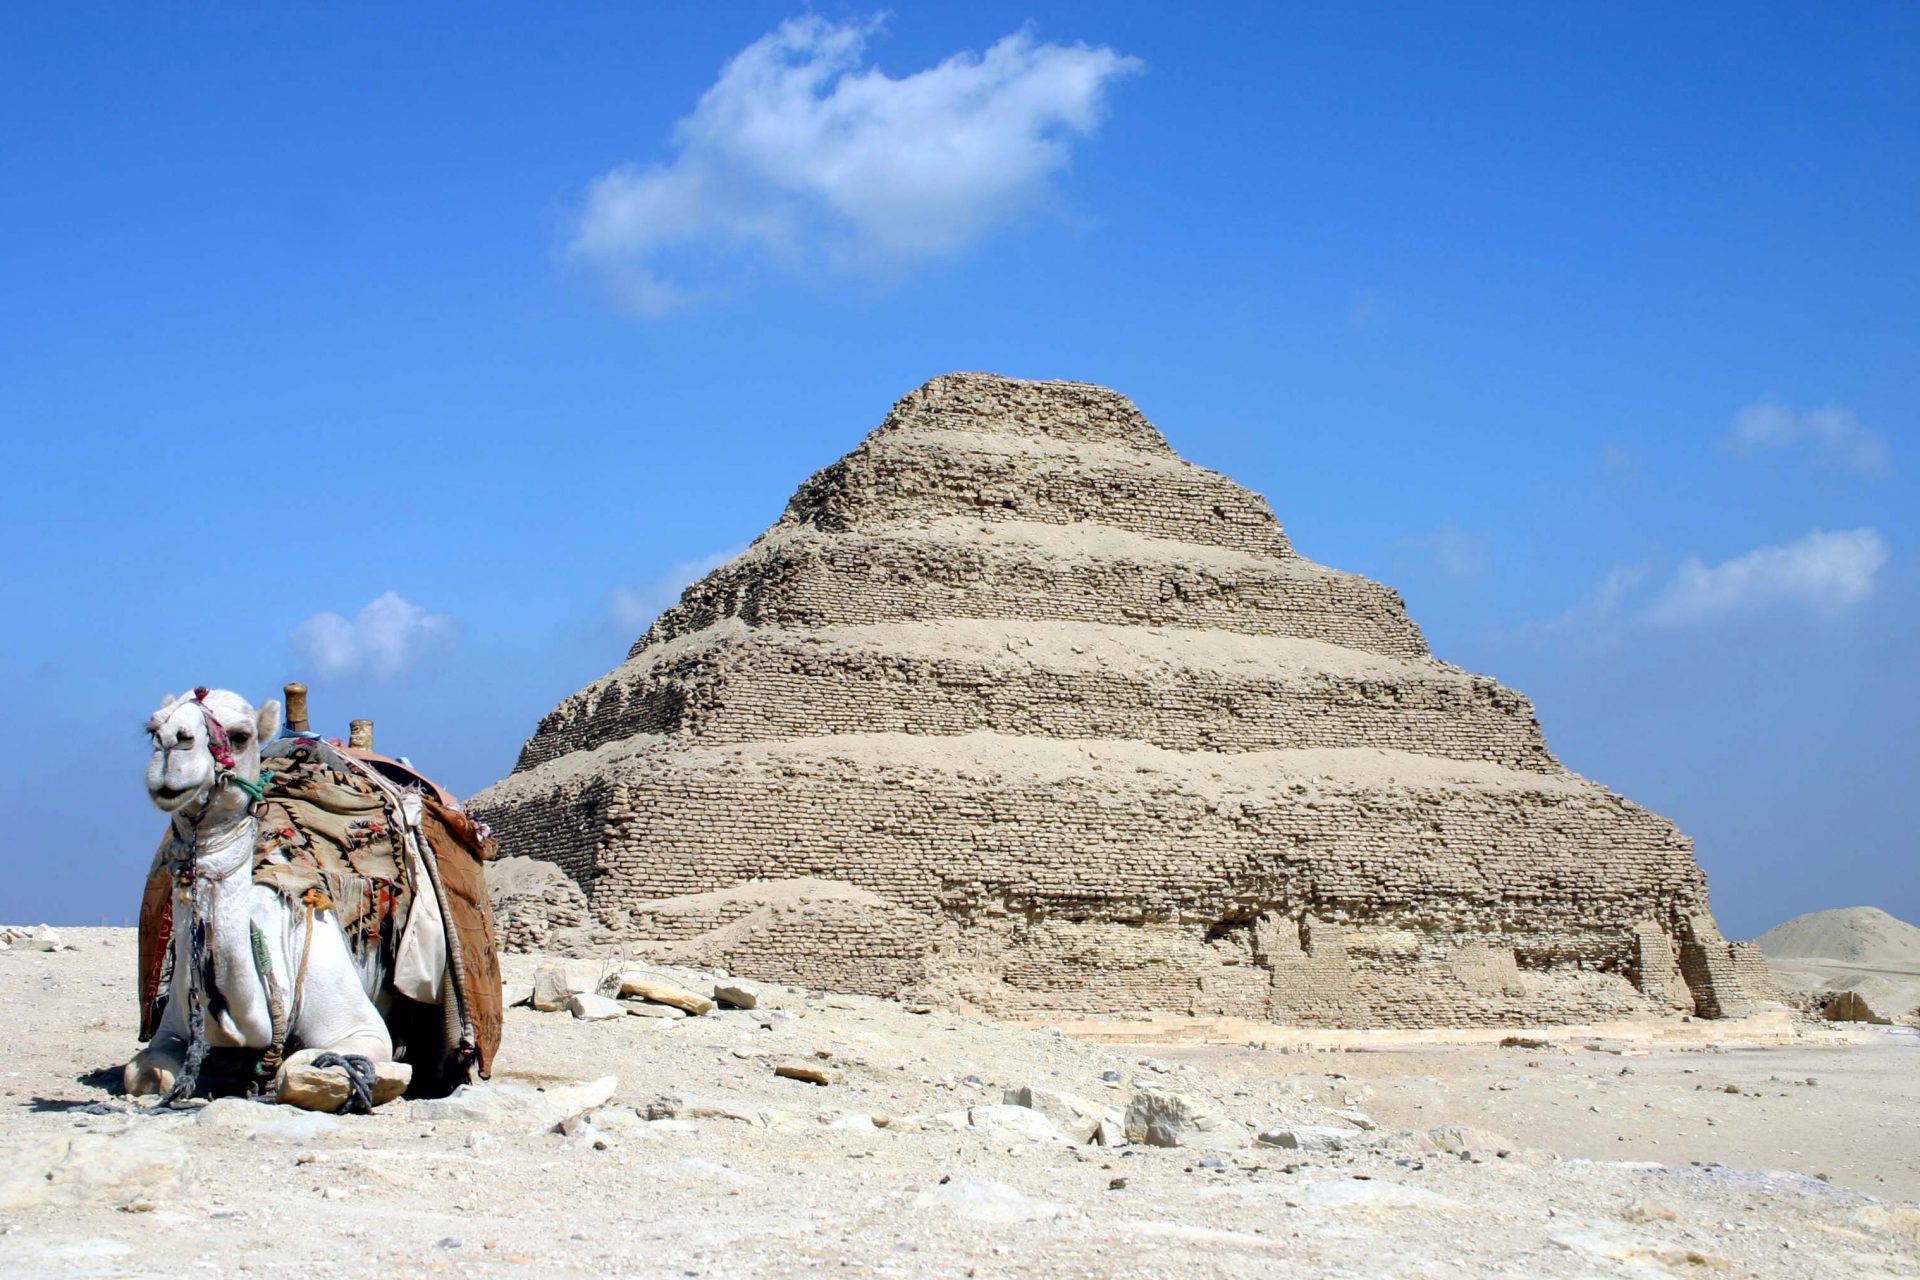 Home of the Step Pyramid of Djoser